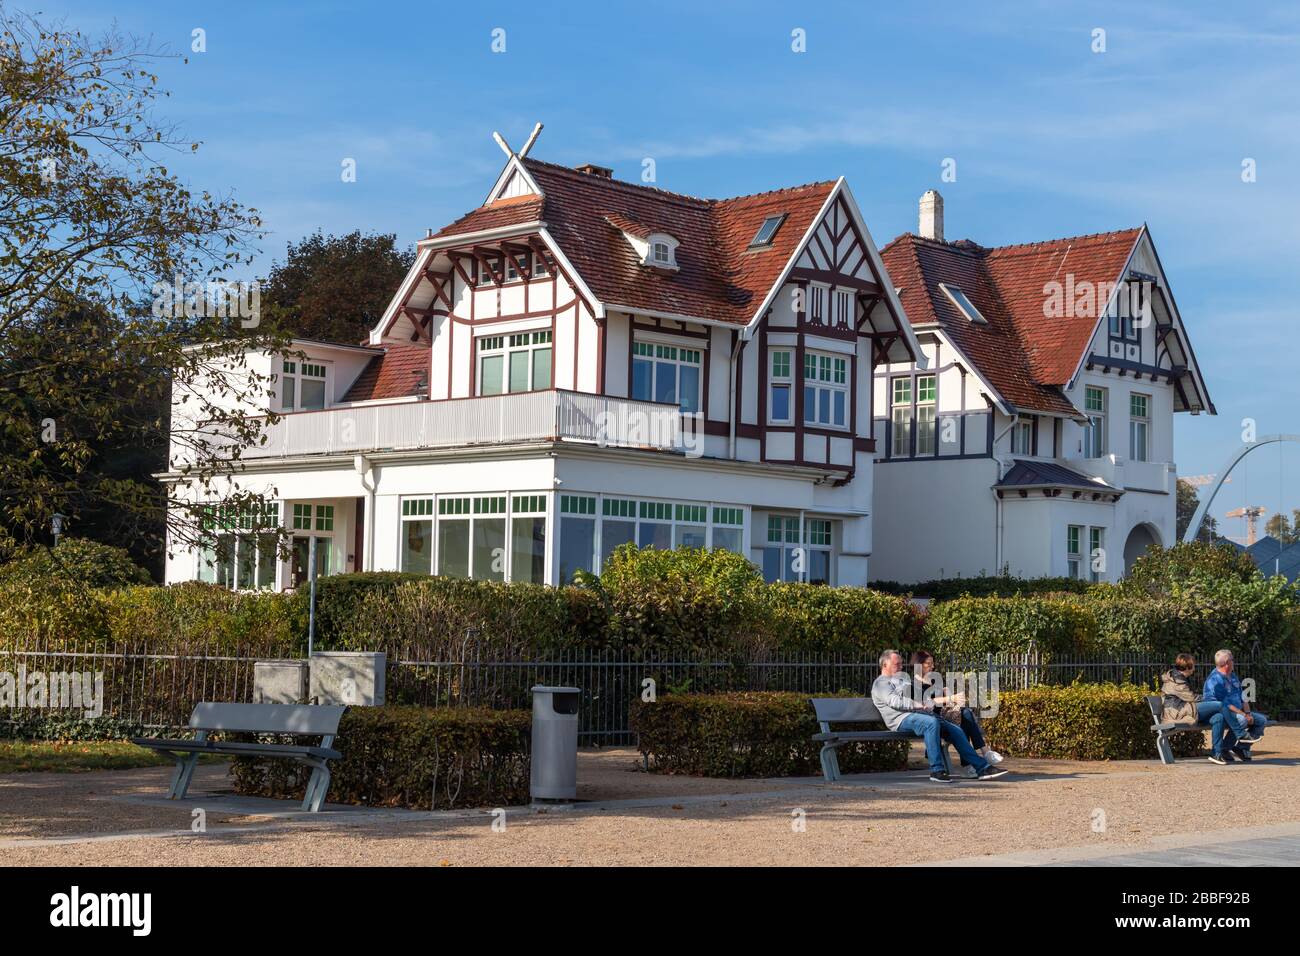 Lübeck-Travemünde, Germany – October 10, 2018: Historic buildings on the beach promenade of Travemünde. A tourist magnet for Baltic Sea vacationers. H Stock Photo